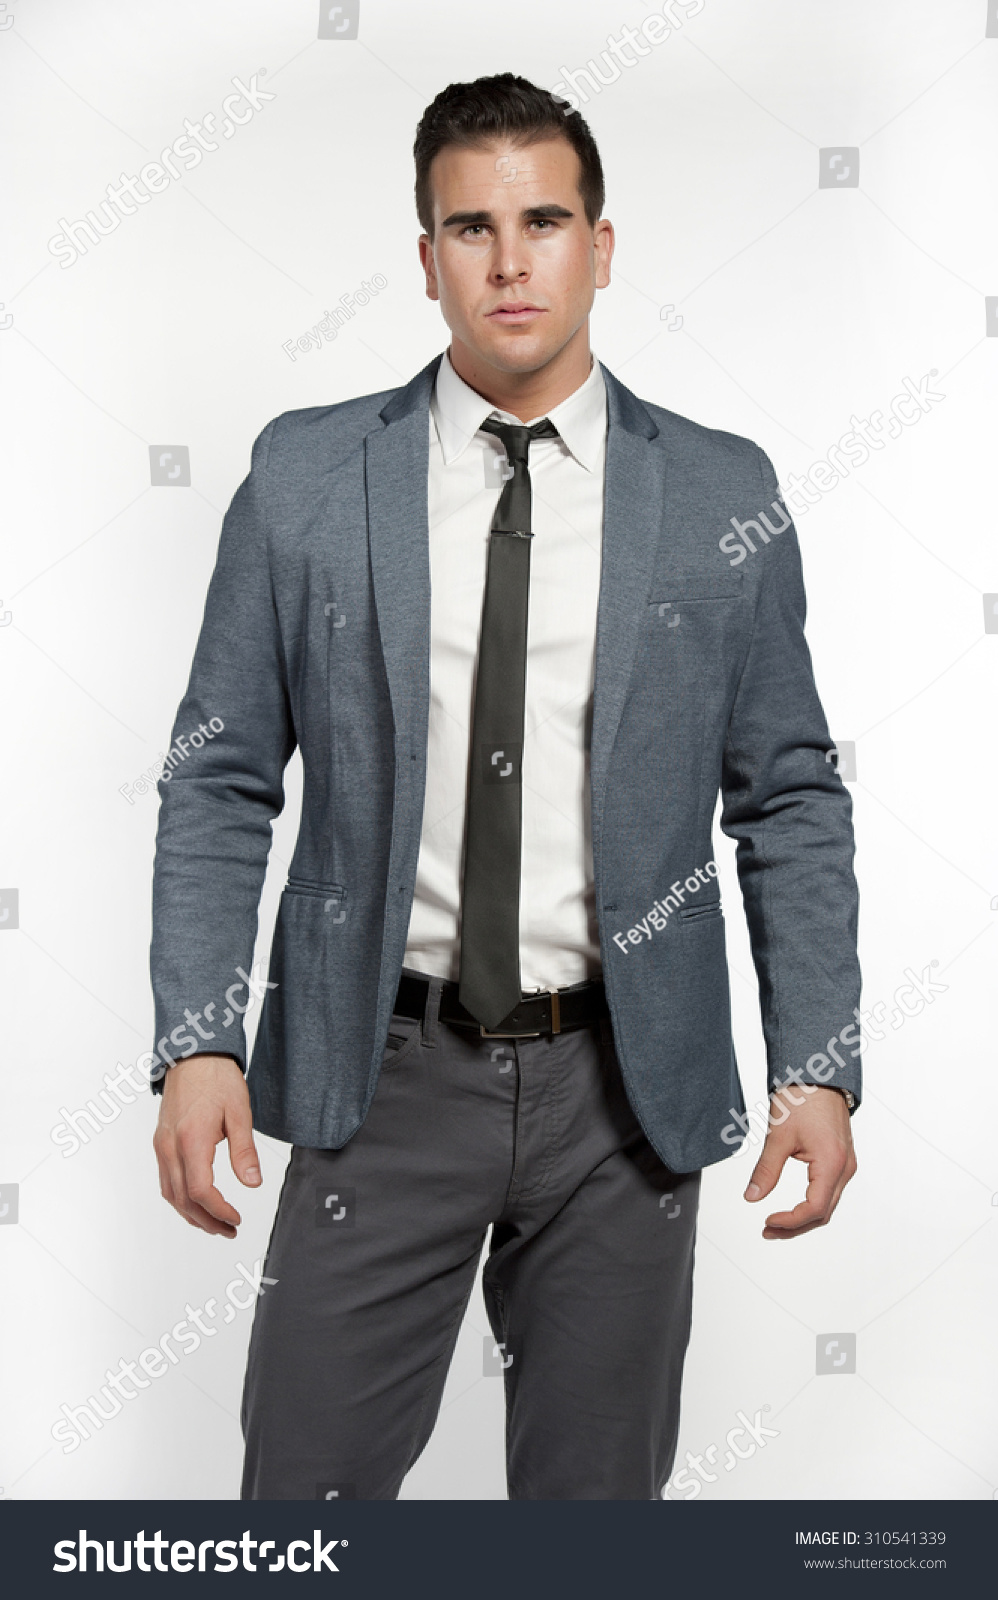 Attractive White Male Wearing Fitted Gray Stock Photo 310541339